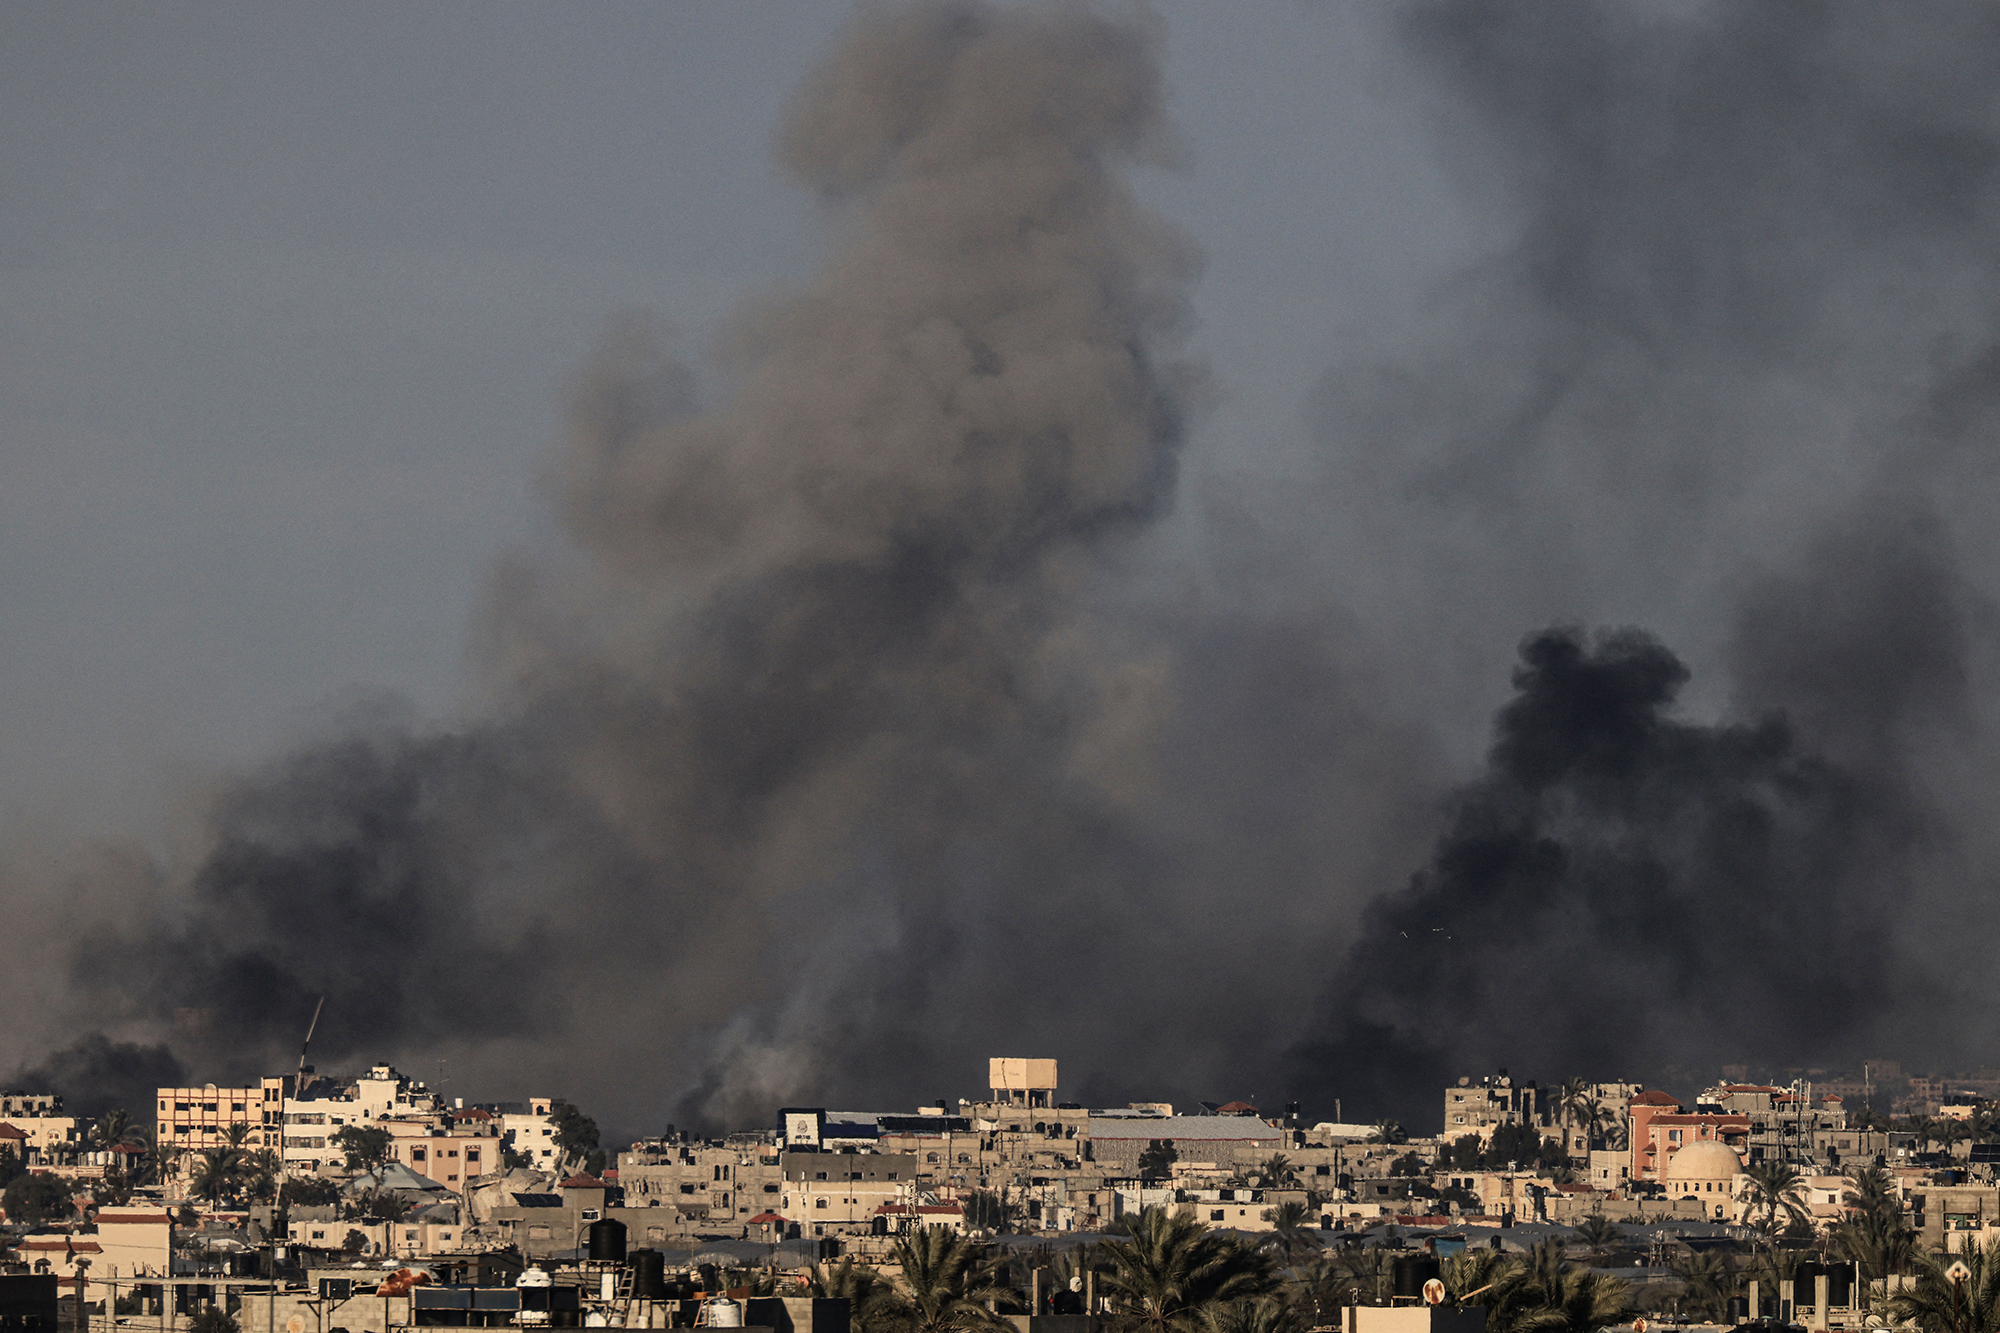 Smoke billows over Khan Younis in southern Gaza during Israeli bombardment on January 15.